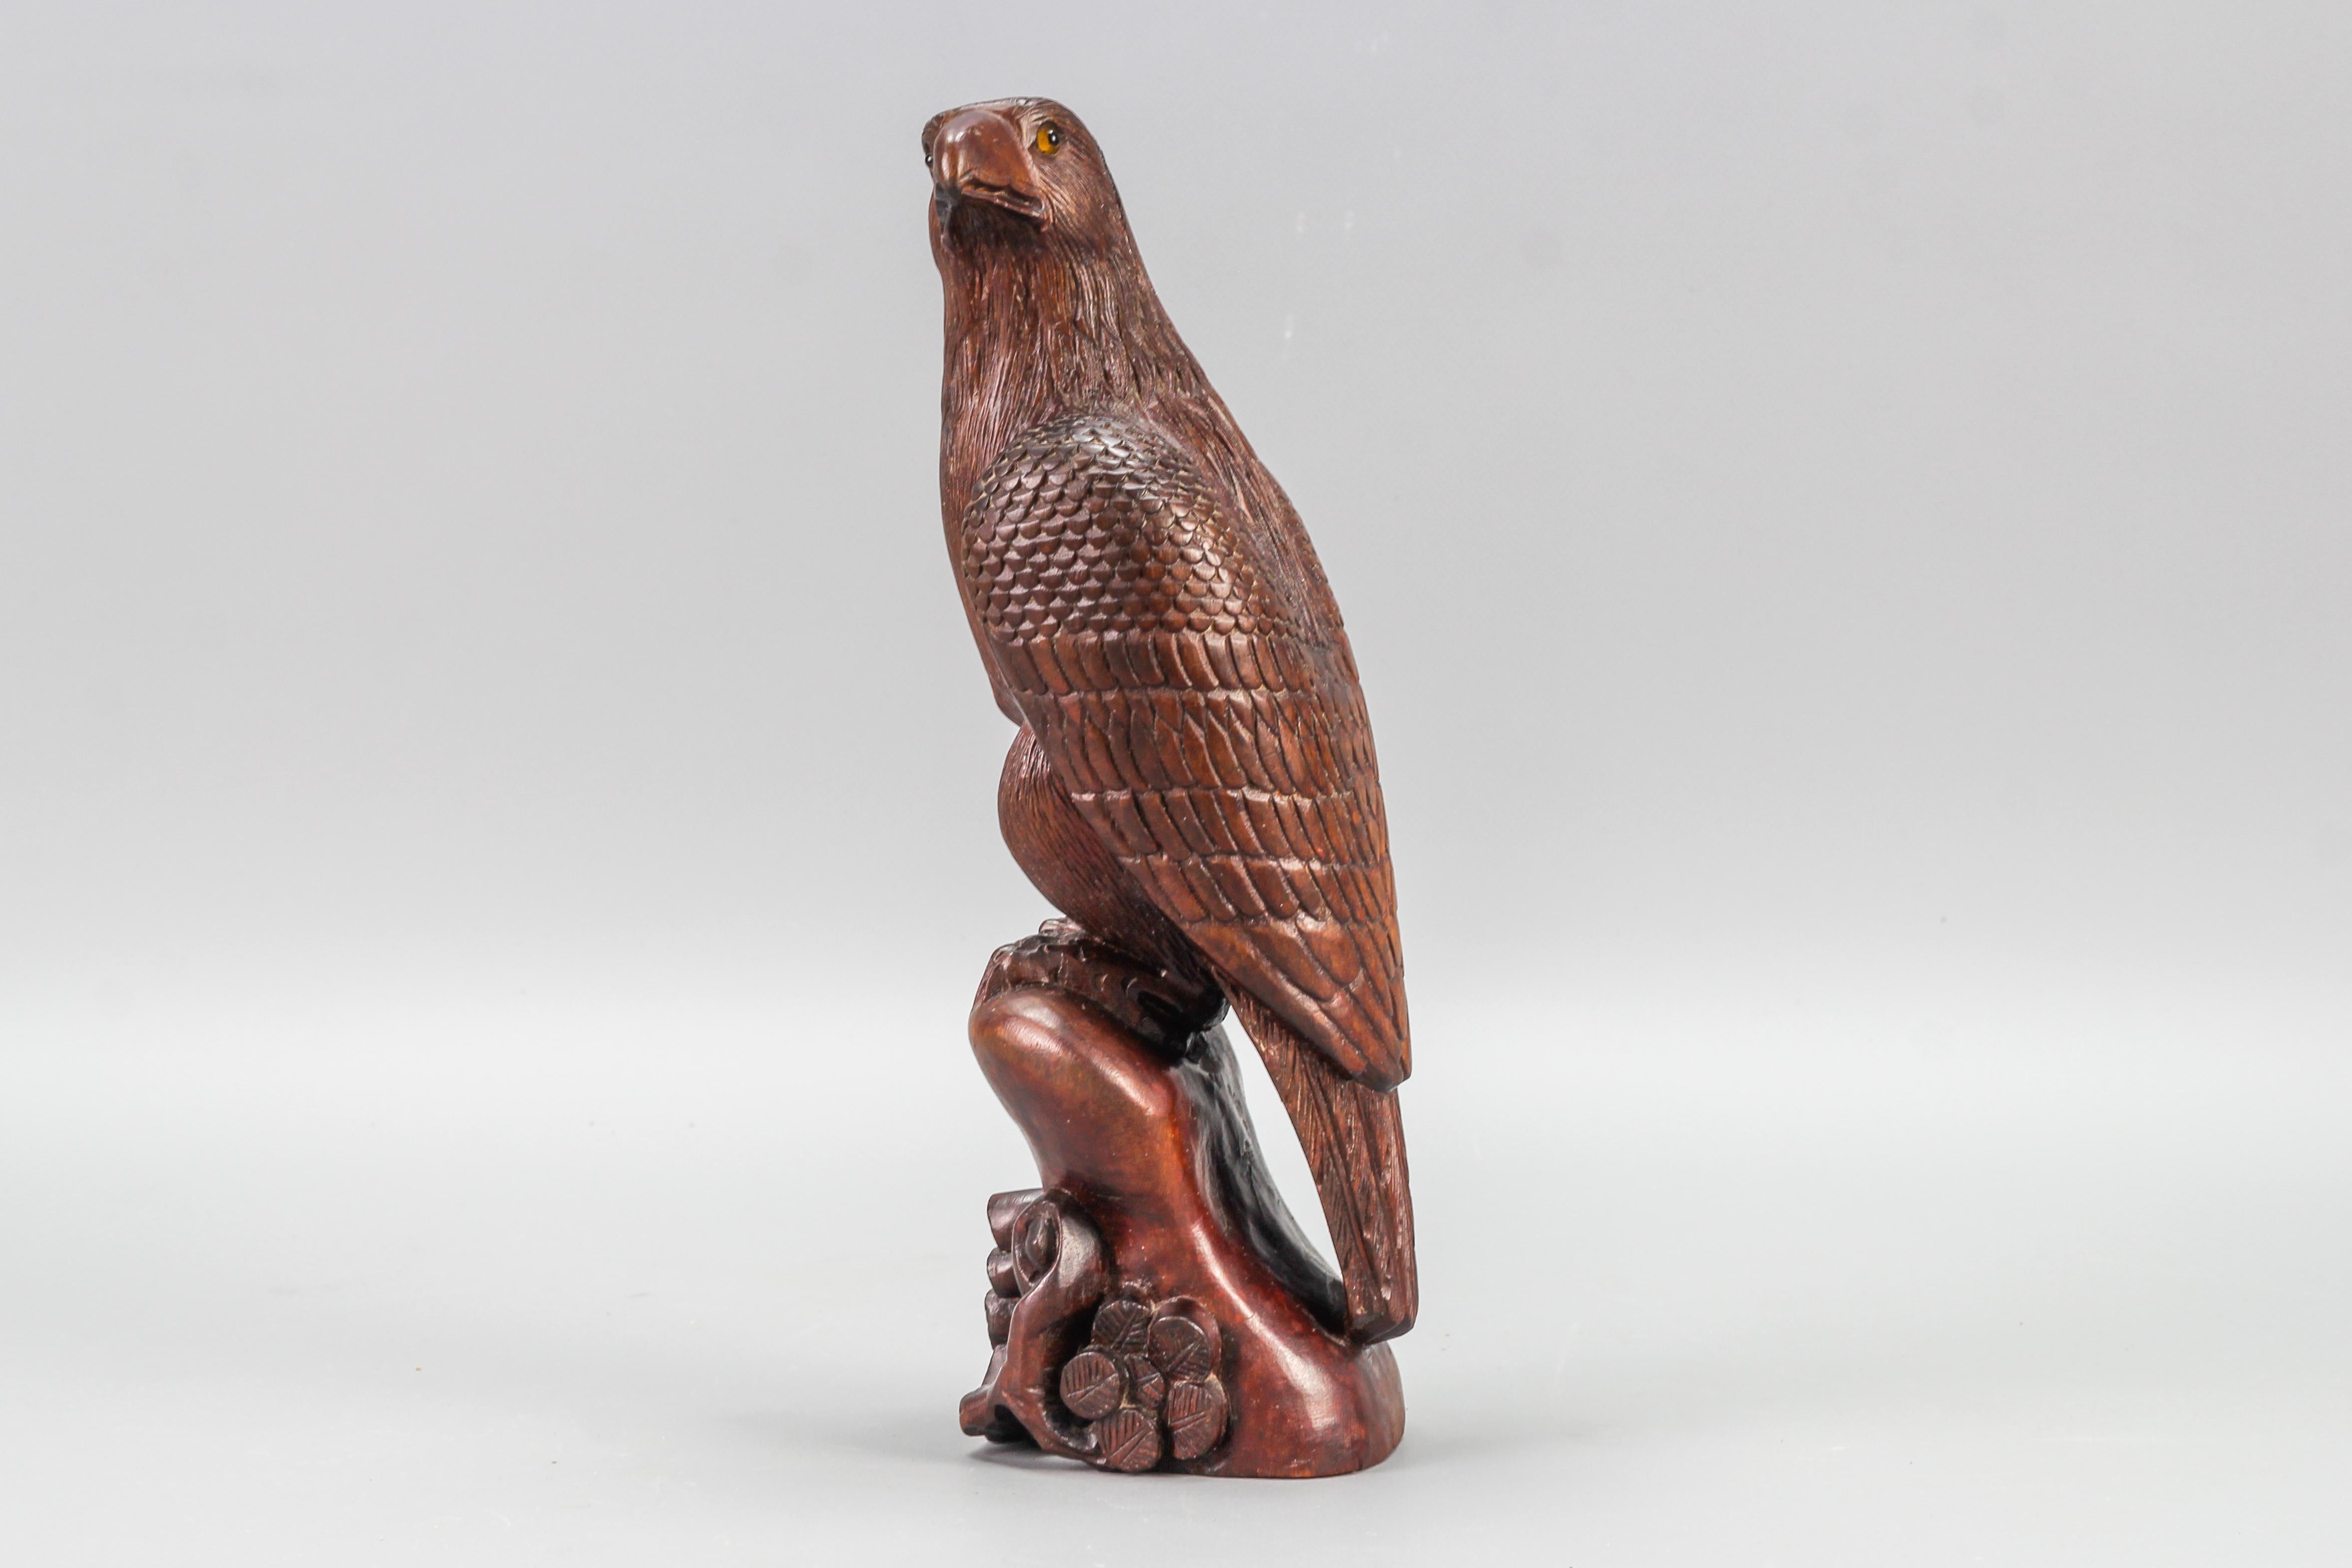 Art Deco Style carved Wooden Eagle sculpture with glass eyes from the 1960s.
This stunning, naturalistically hand carved and brown tinted beechwood eagle figure with glass eyes, perched on a wooden trunk decorated with a leafed branch, would be a